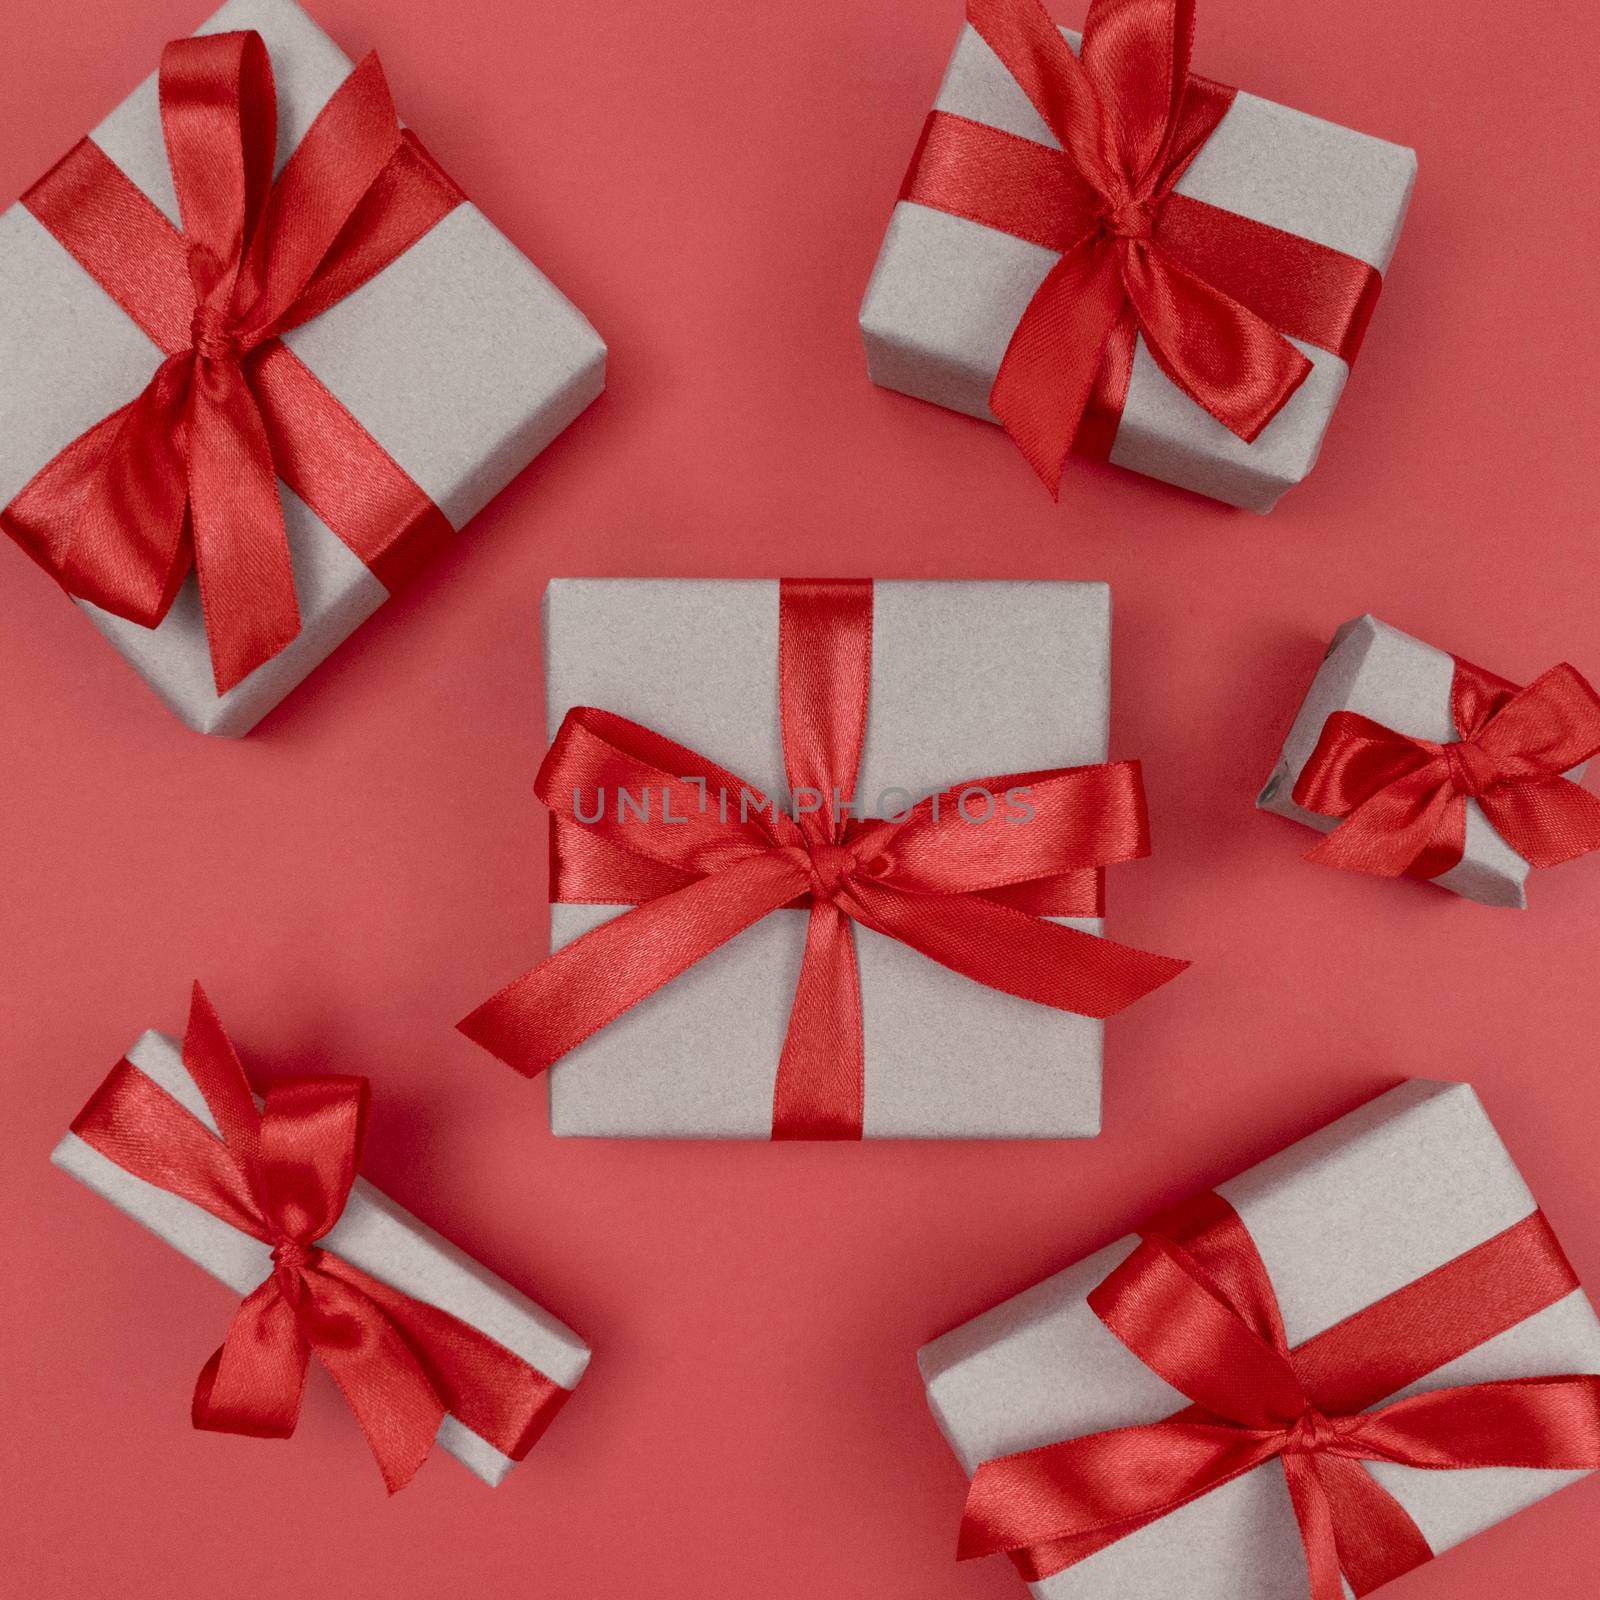 Gift boxes wrapped in craft paper with red ribbons and bows. Festive monochrome flat lay